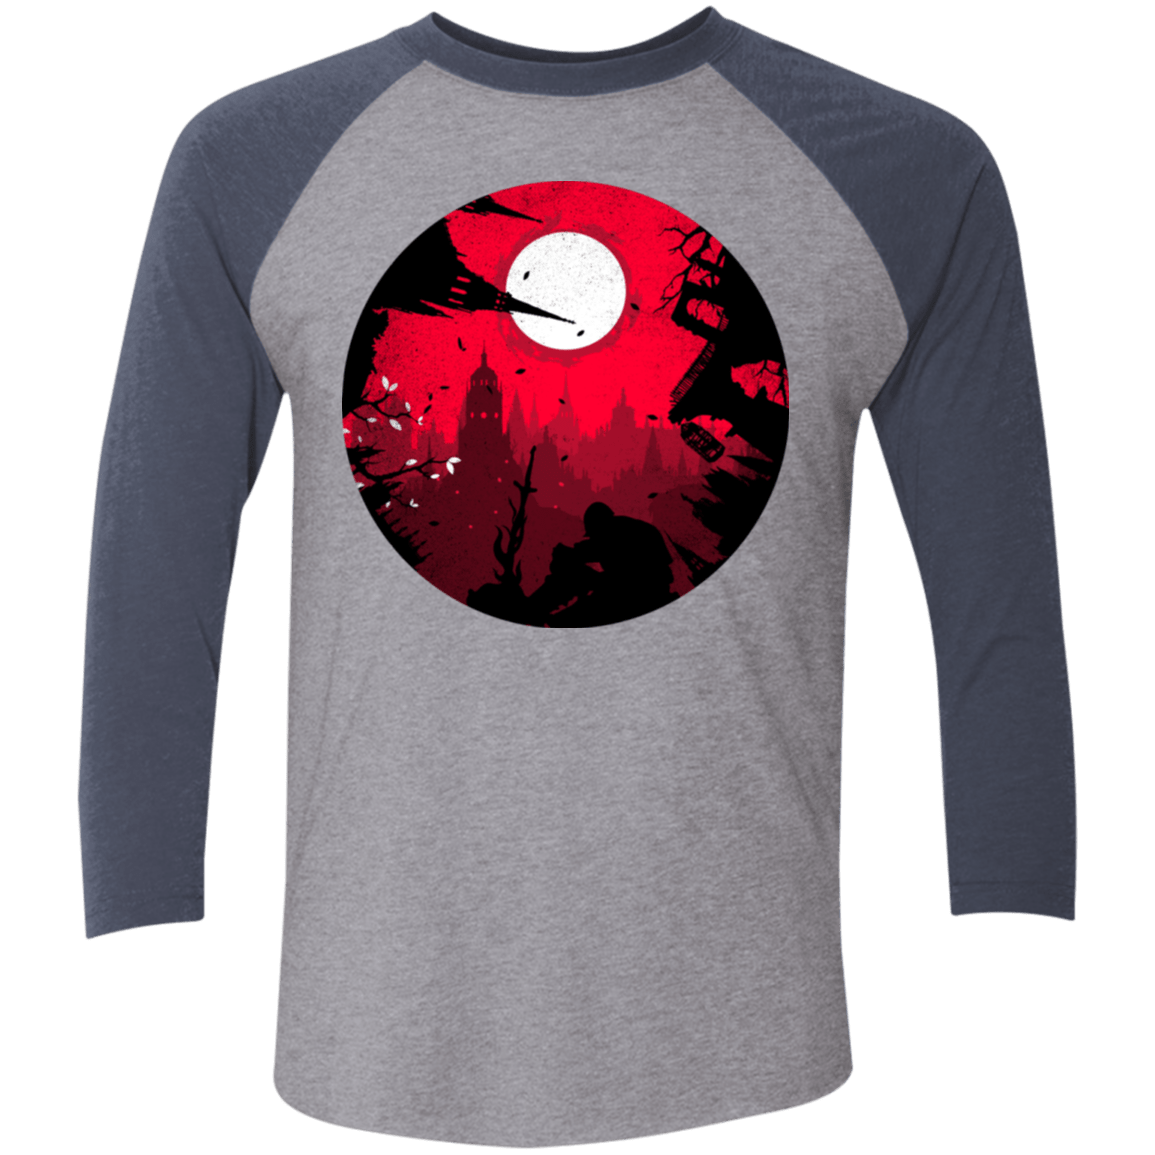 T-Shirts Premium Heather/Vintage Navy / X-Small Embrace the Darkness Men's Triblend 3/4 Sleeve